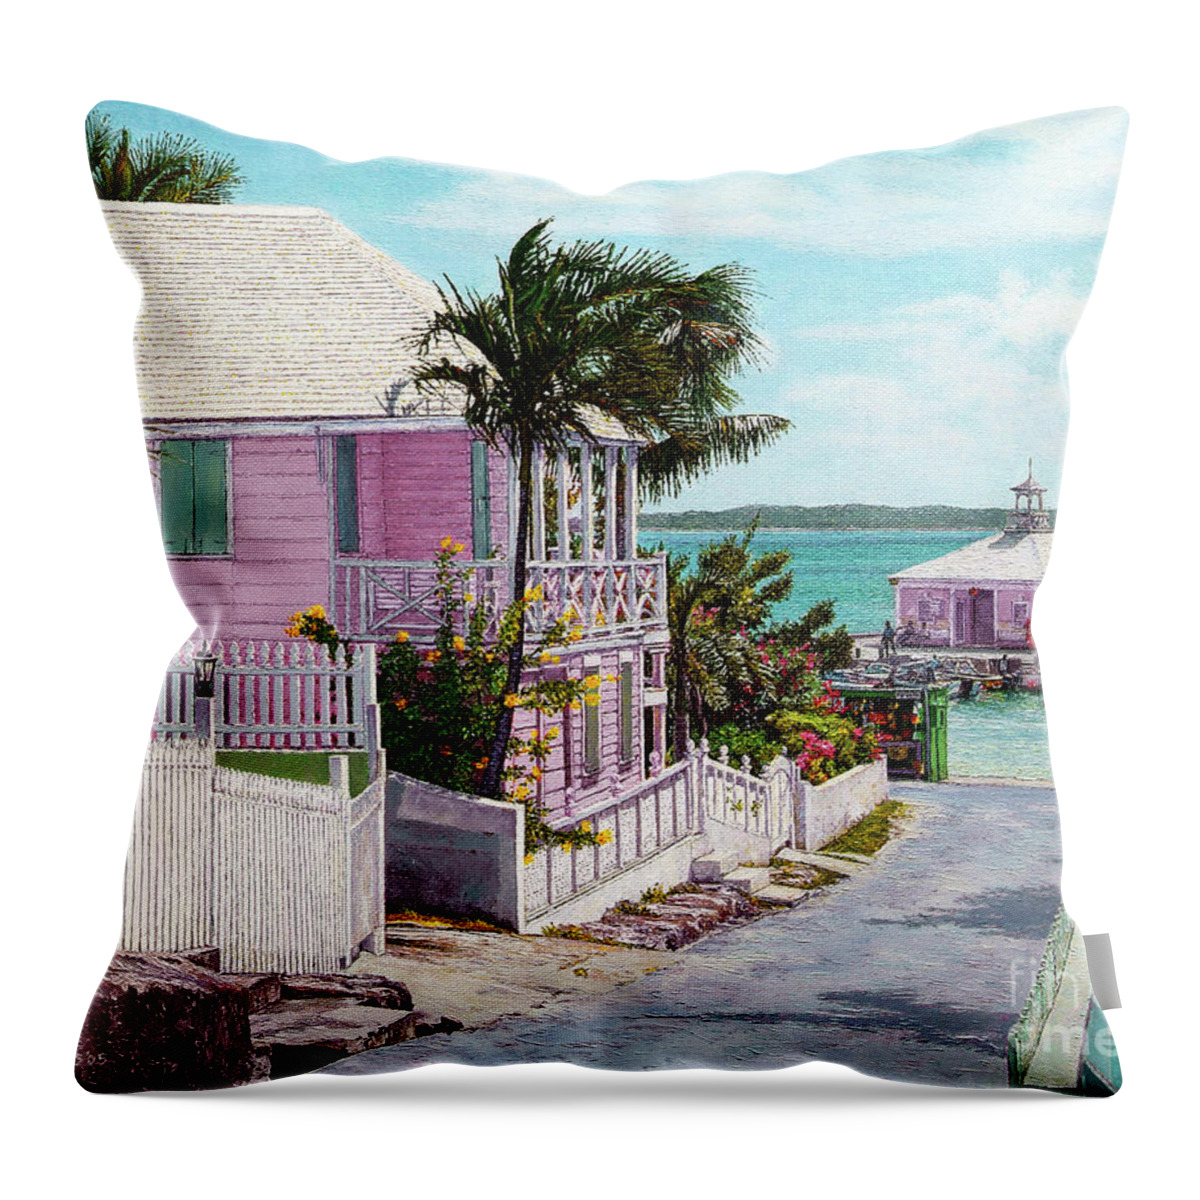 Eddie Throw Pillow featuring the painting Miss Lena's by Eddie Minnis